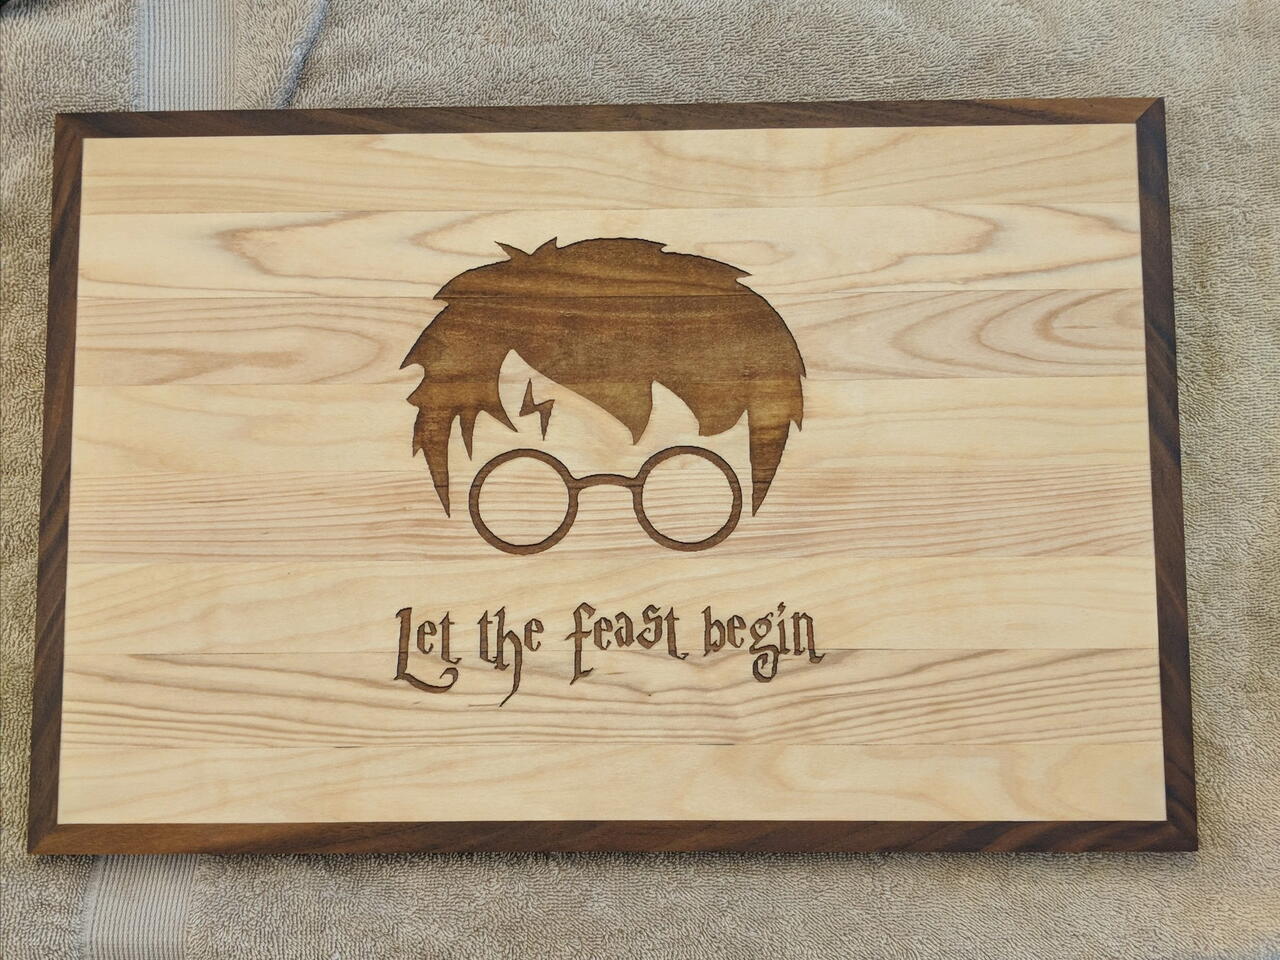 How to make Harry Potter Cutting Board | Video by Zack | Craftlog